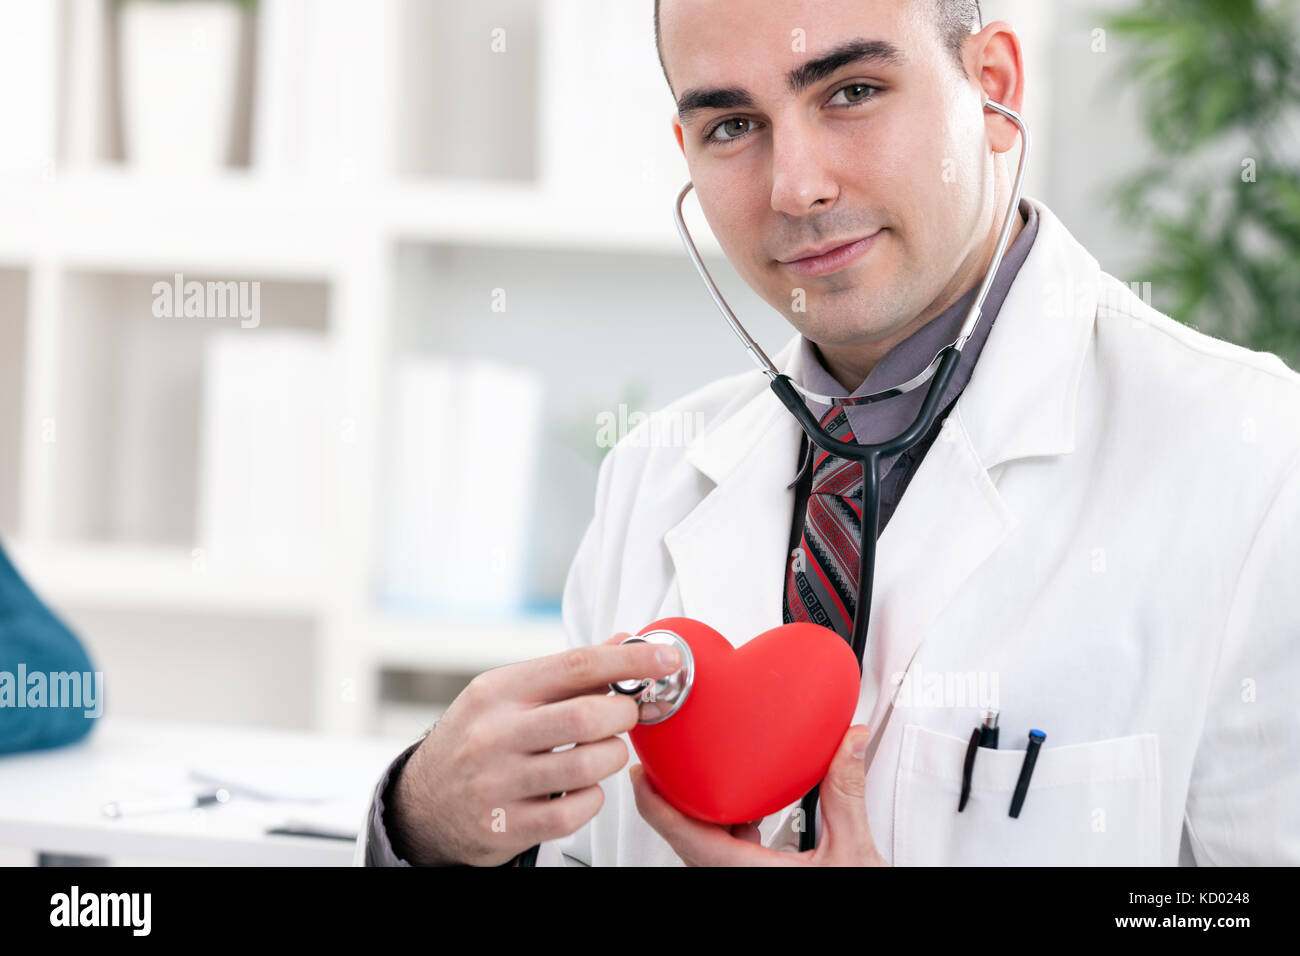 Young cardiologist holding red heart and stethoscope Stock Photo